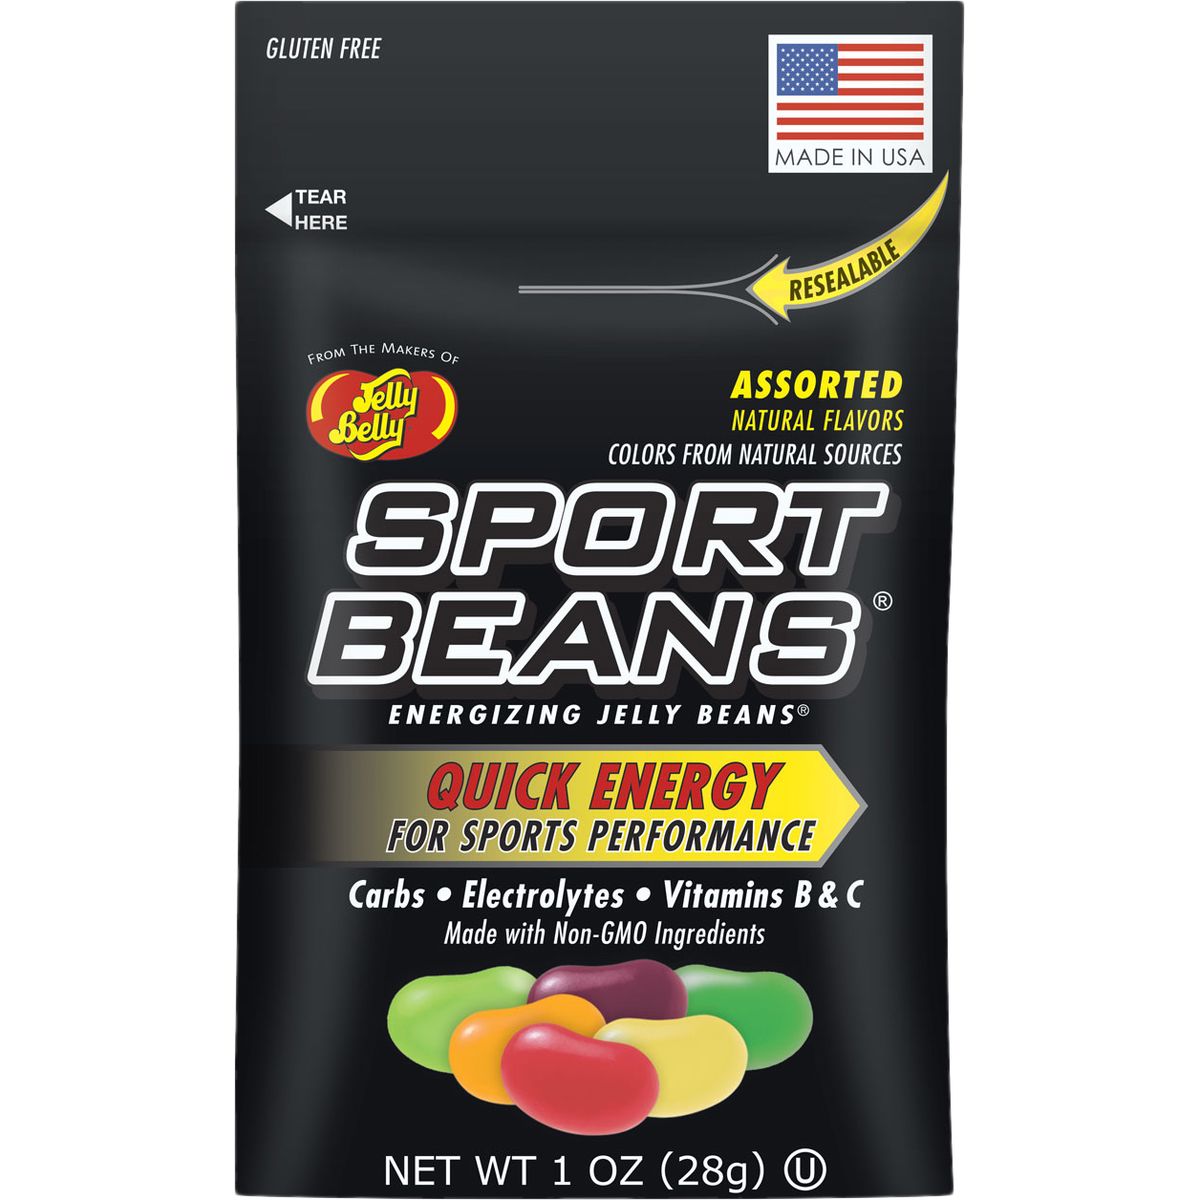 Sport Beans Energizing Jelly Beans 24 Pack